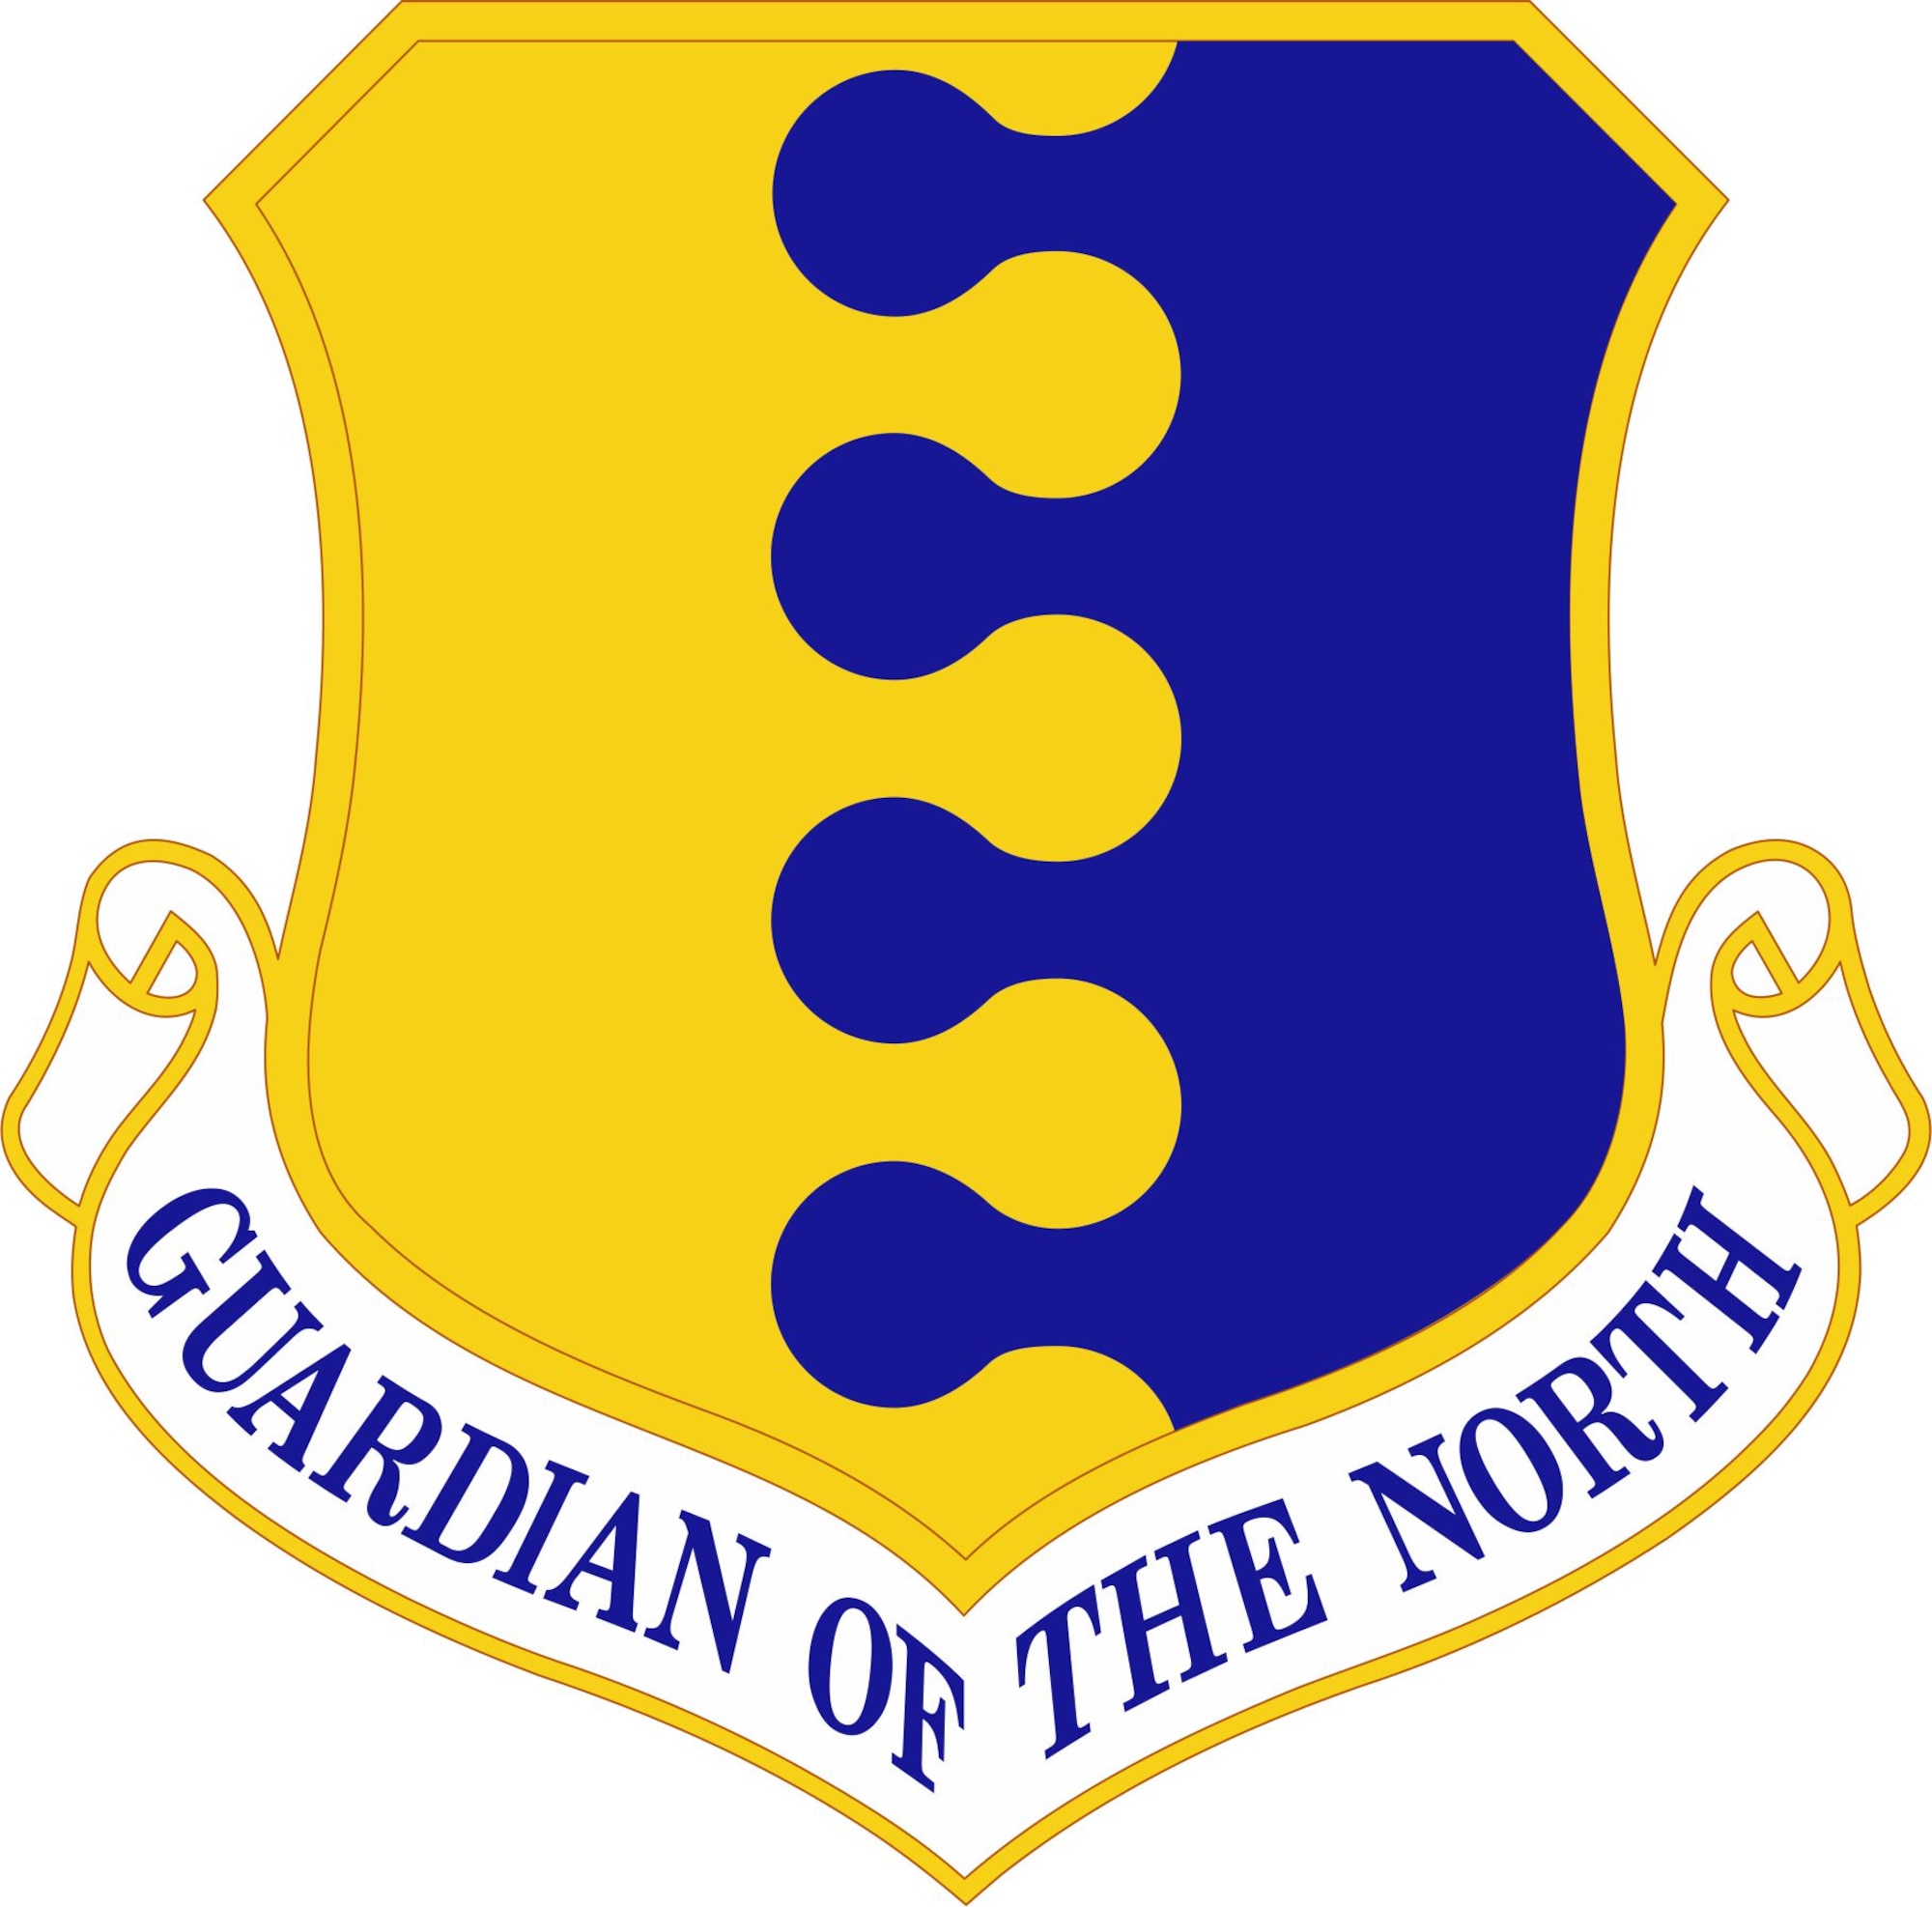 The 28th Bomb Wing at Ellsworth Air Force Base, S.D., updated its emblem Aug. 26, 2019. (U.S. Air Force graphic).